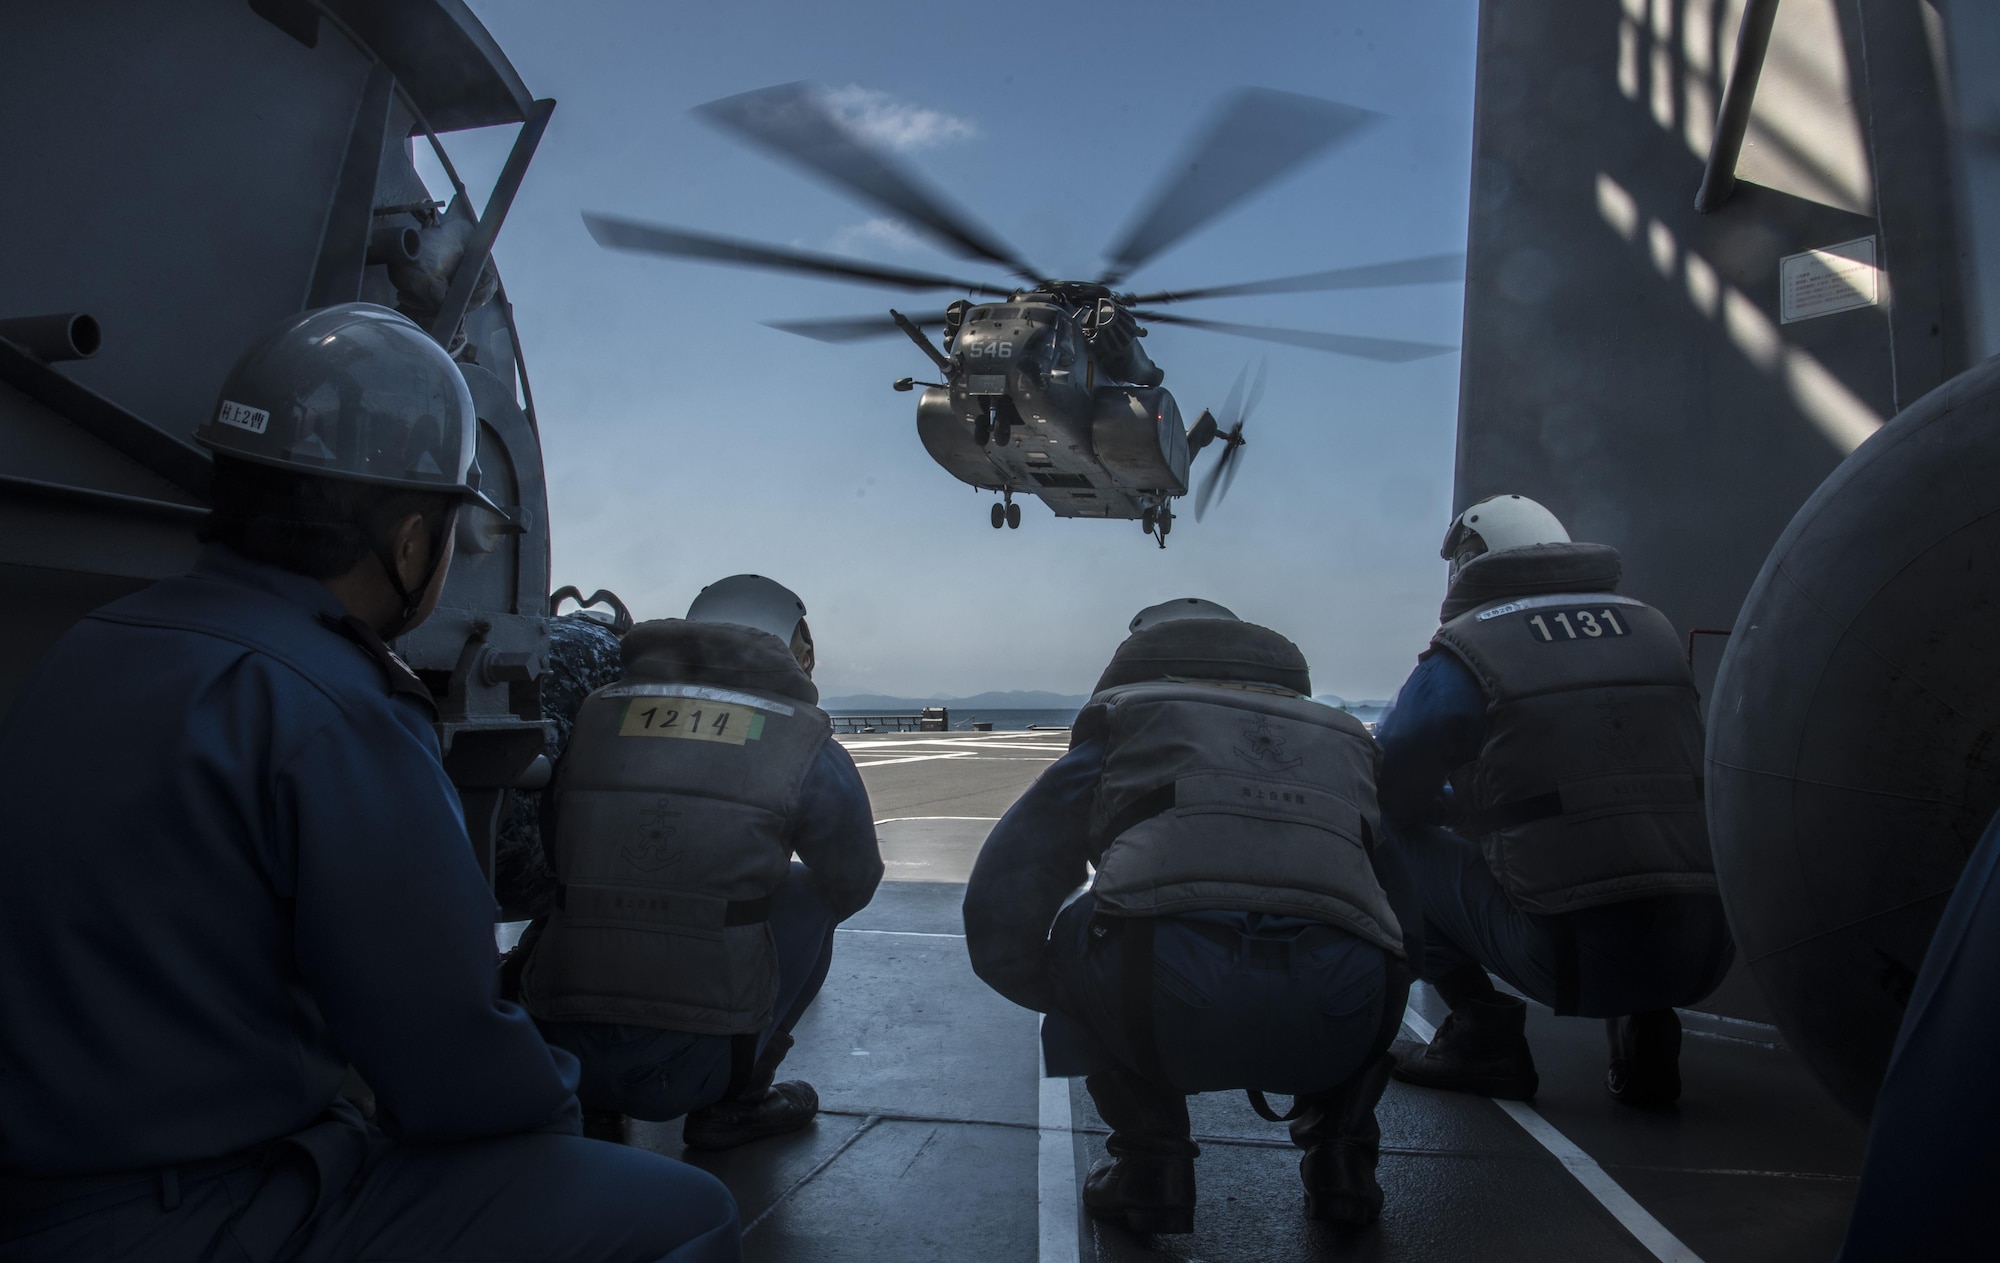 Members of the Japan Maritime Self-Defense Force prepare to receive an MH-53E Sea Dragon aboard the JS Uraga, while taking part in Mine Countermeasures Exercise 2JA in Mutsu Bay, Japan, July 22, 2016. The 99-foot-long helicopter has two missions: airborne mine counter measure and navy vertical onboard delivery. During the exercise, the U.S. Navy operated out of Misawa Air Base, Japan, to practice these missions while improving interoperability with the JMSDF. (U.S. Air Force photo by Senior Airman Jordyn Fetter)